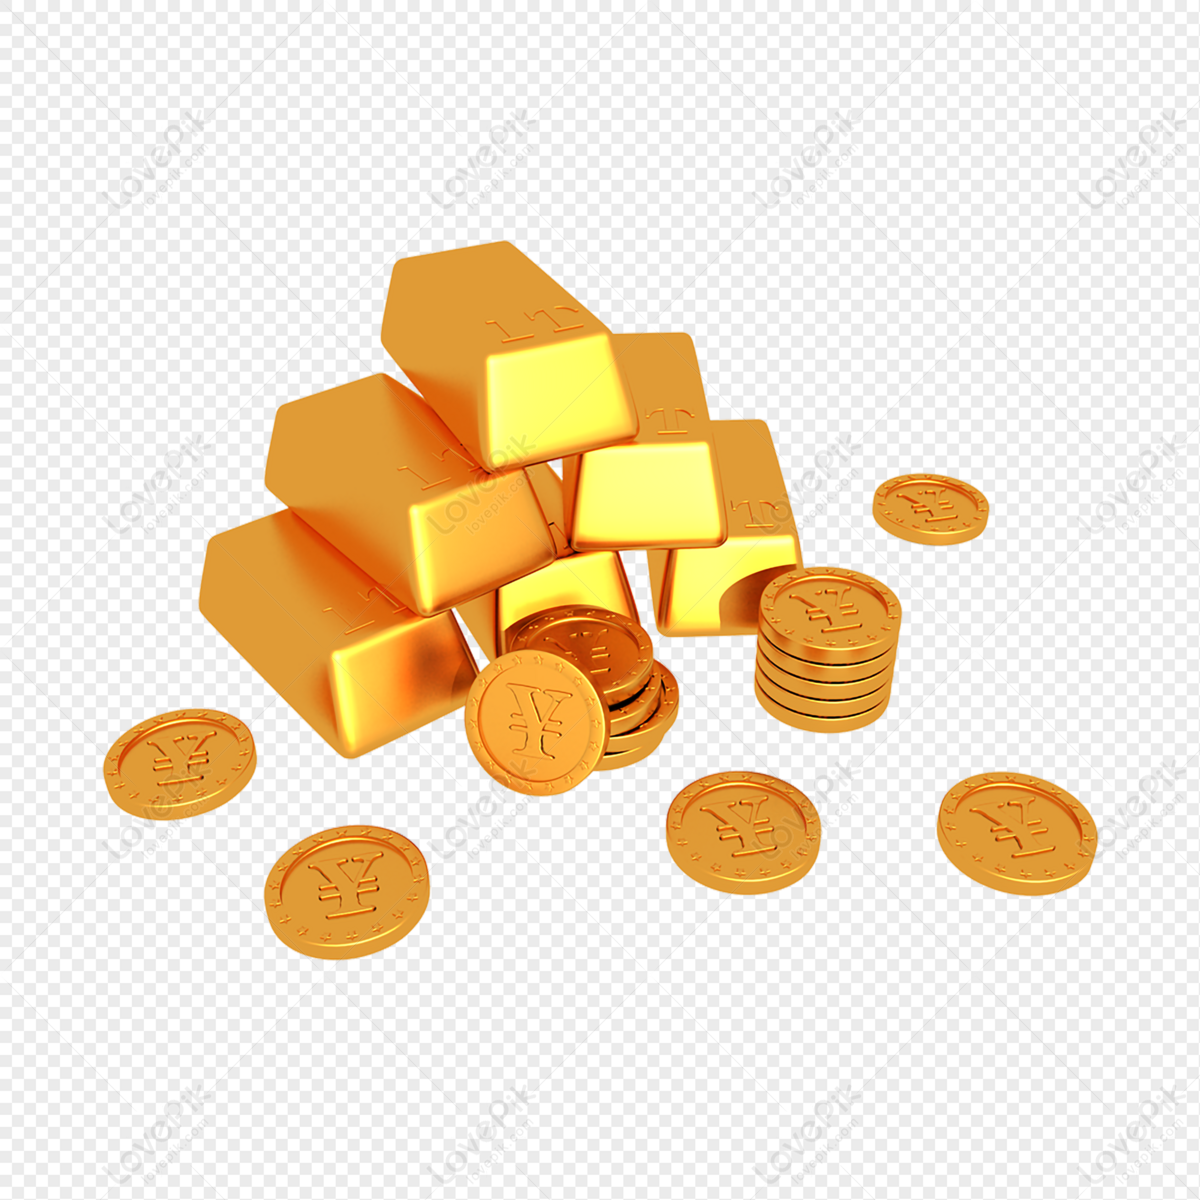 Cartoon Gold Bar Gold Coin Illustration PNG Transparent Background And  Clipart Image For Free Download - Lovepik | 401277070